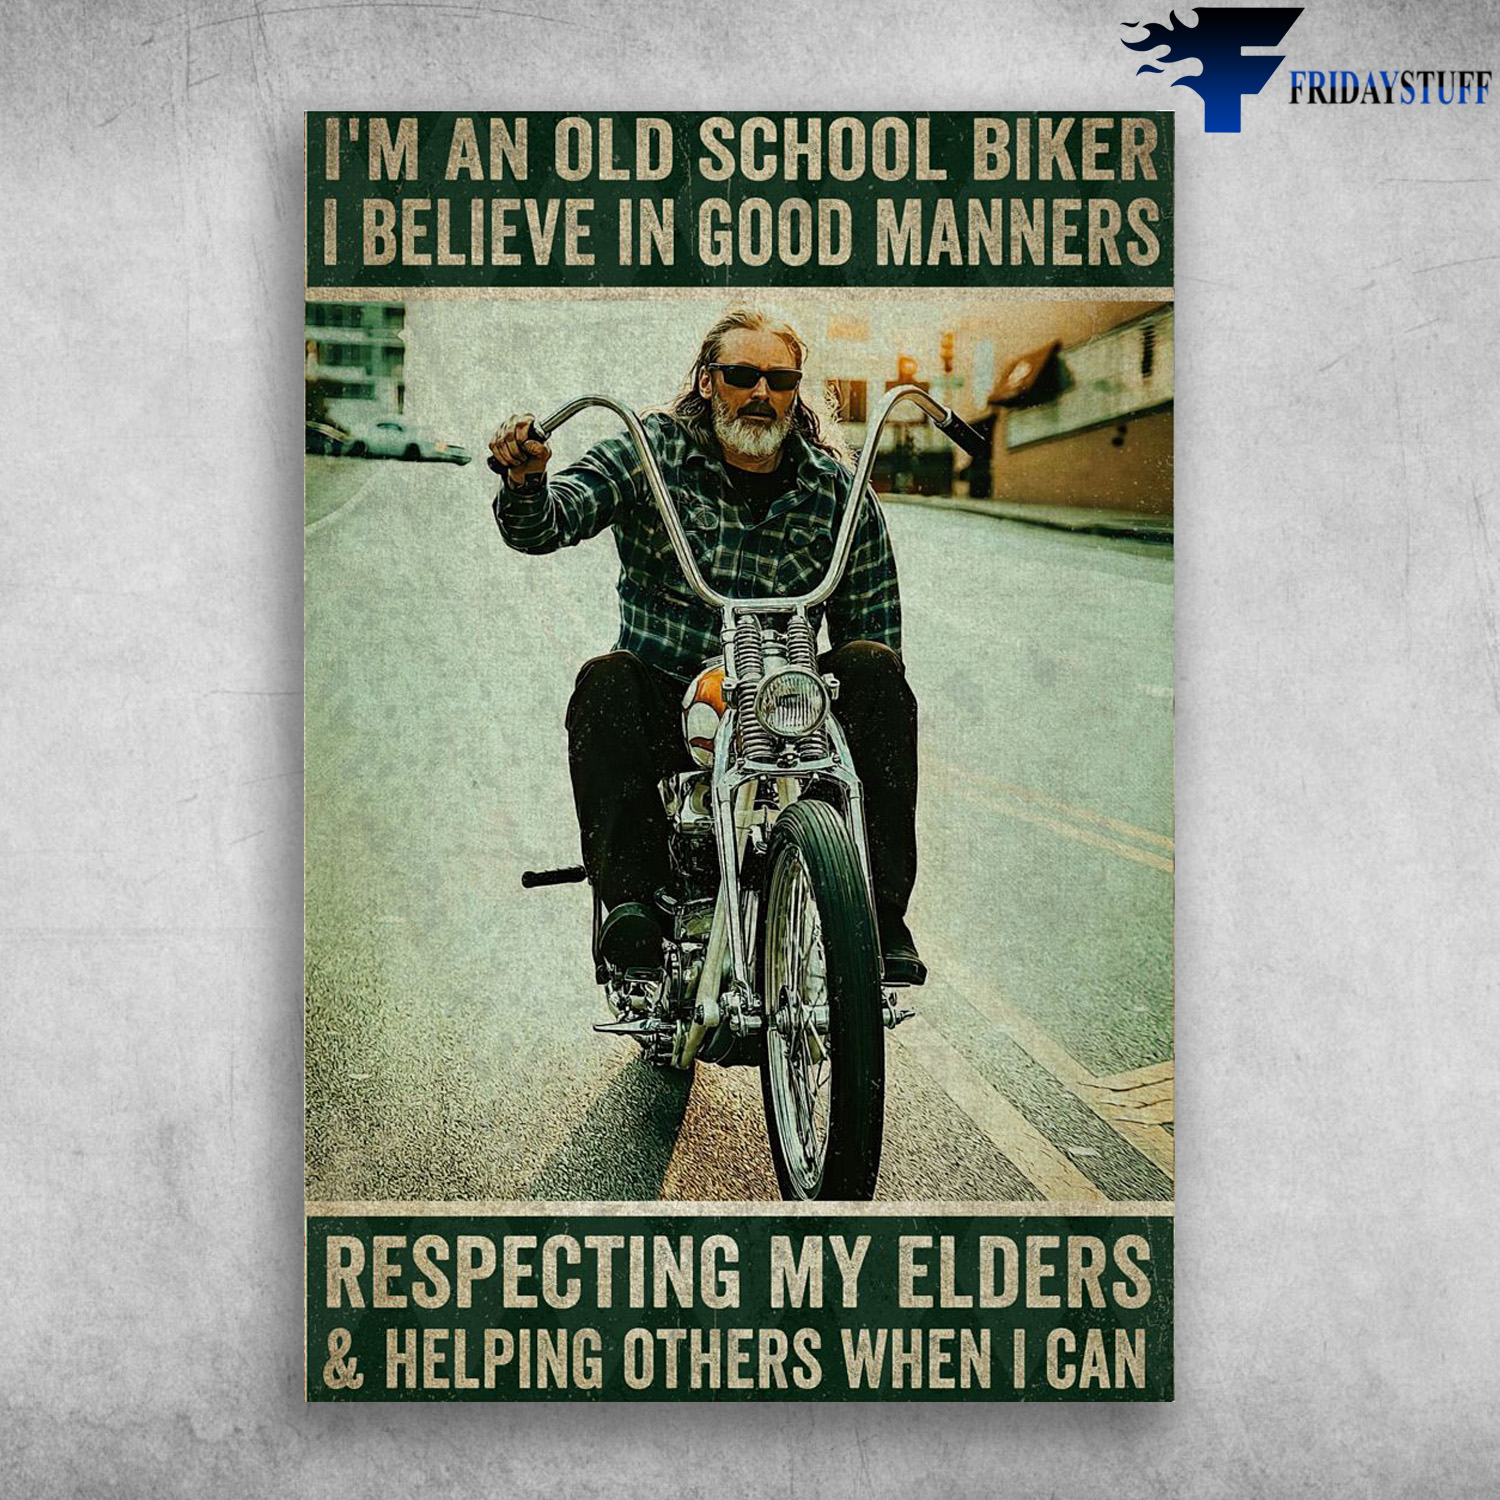 Old Man Riding Motorbike - I'm An Old School Biker, I Believe In Good Manners, Respecting My Elders And Helping Others When I Can